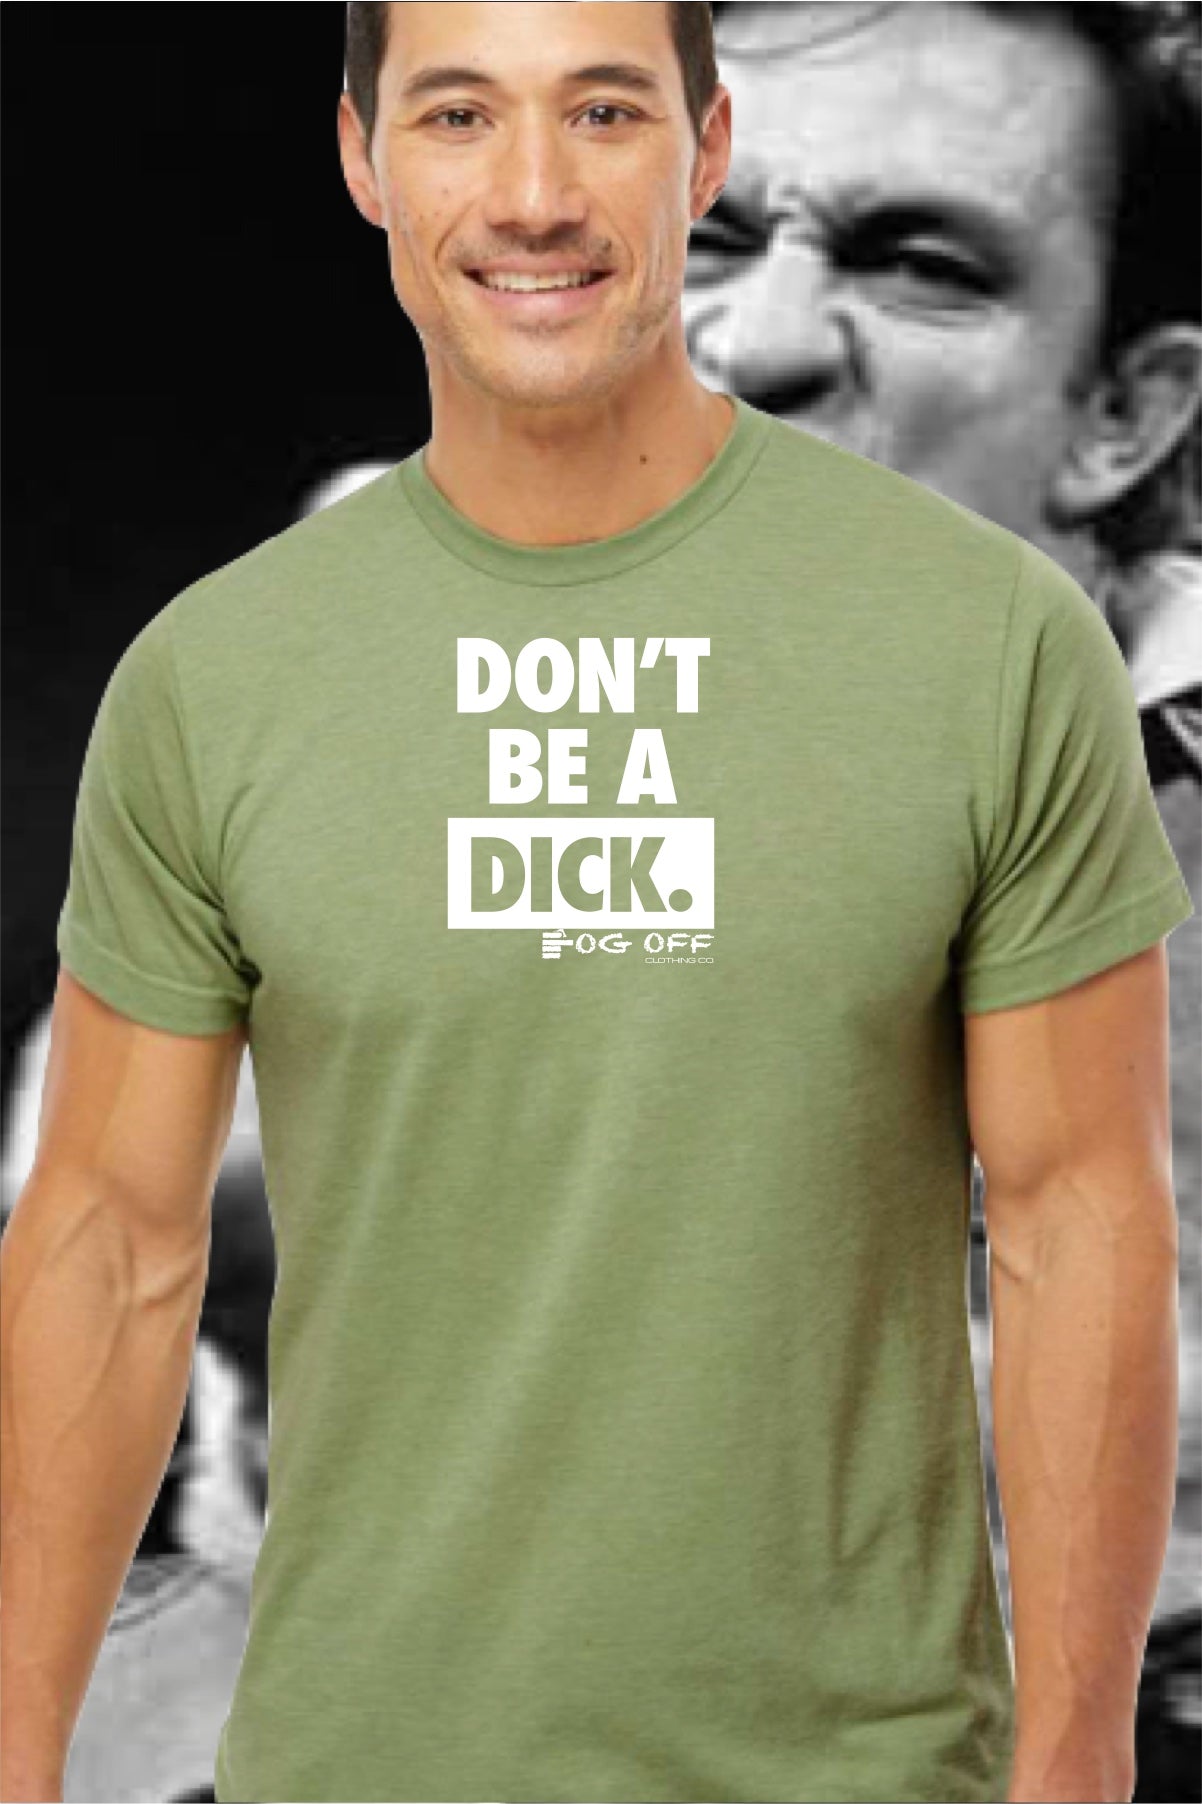 NEW DON'T BE A DICK LOGO MENS T